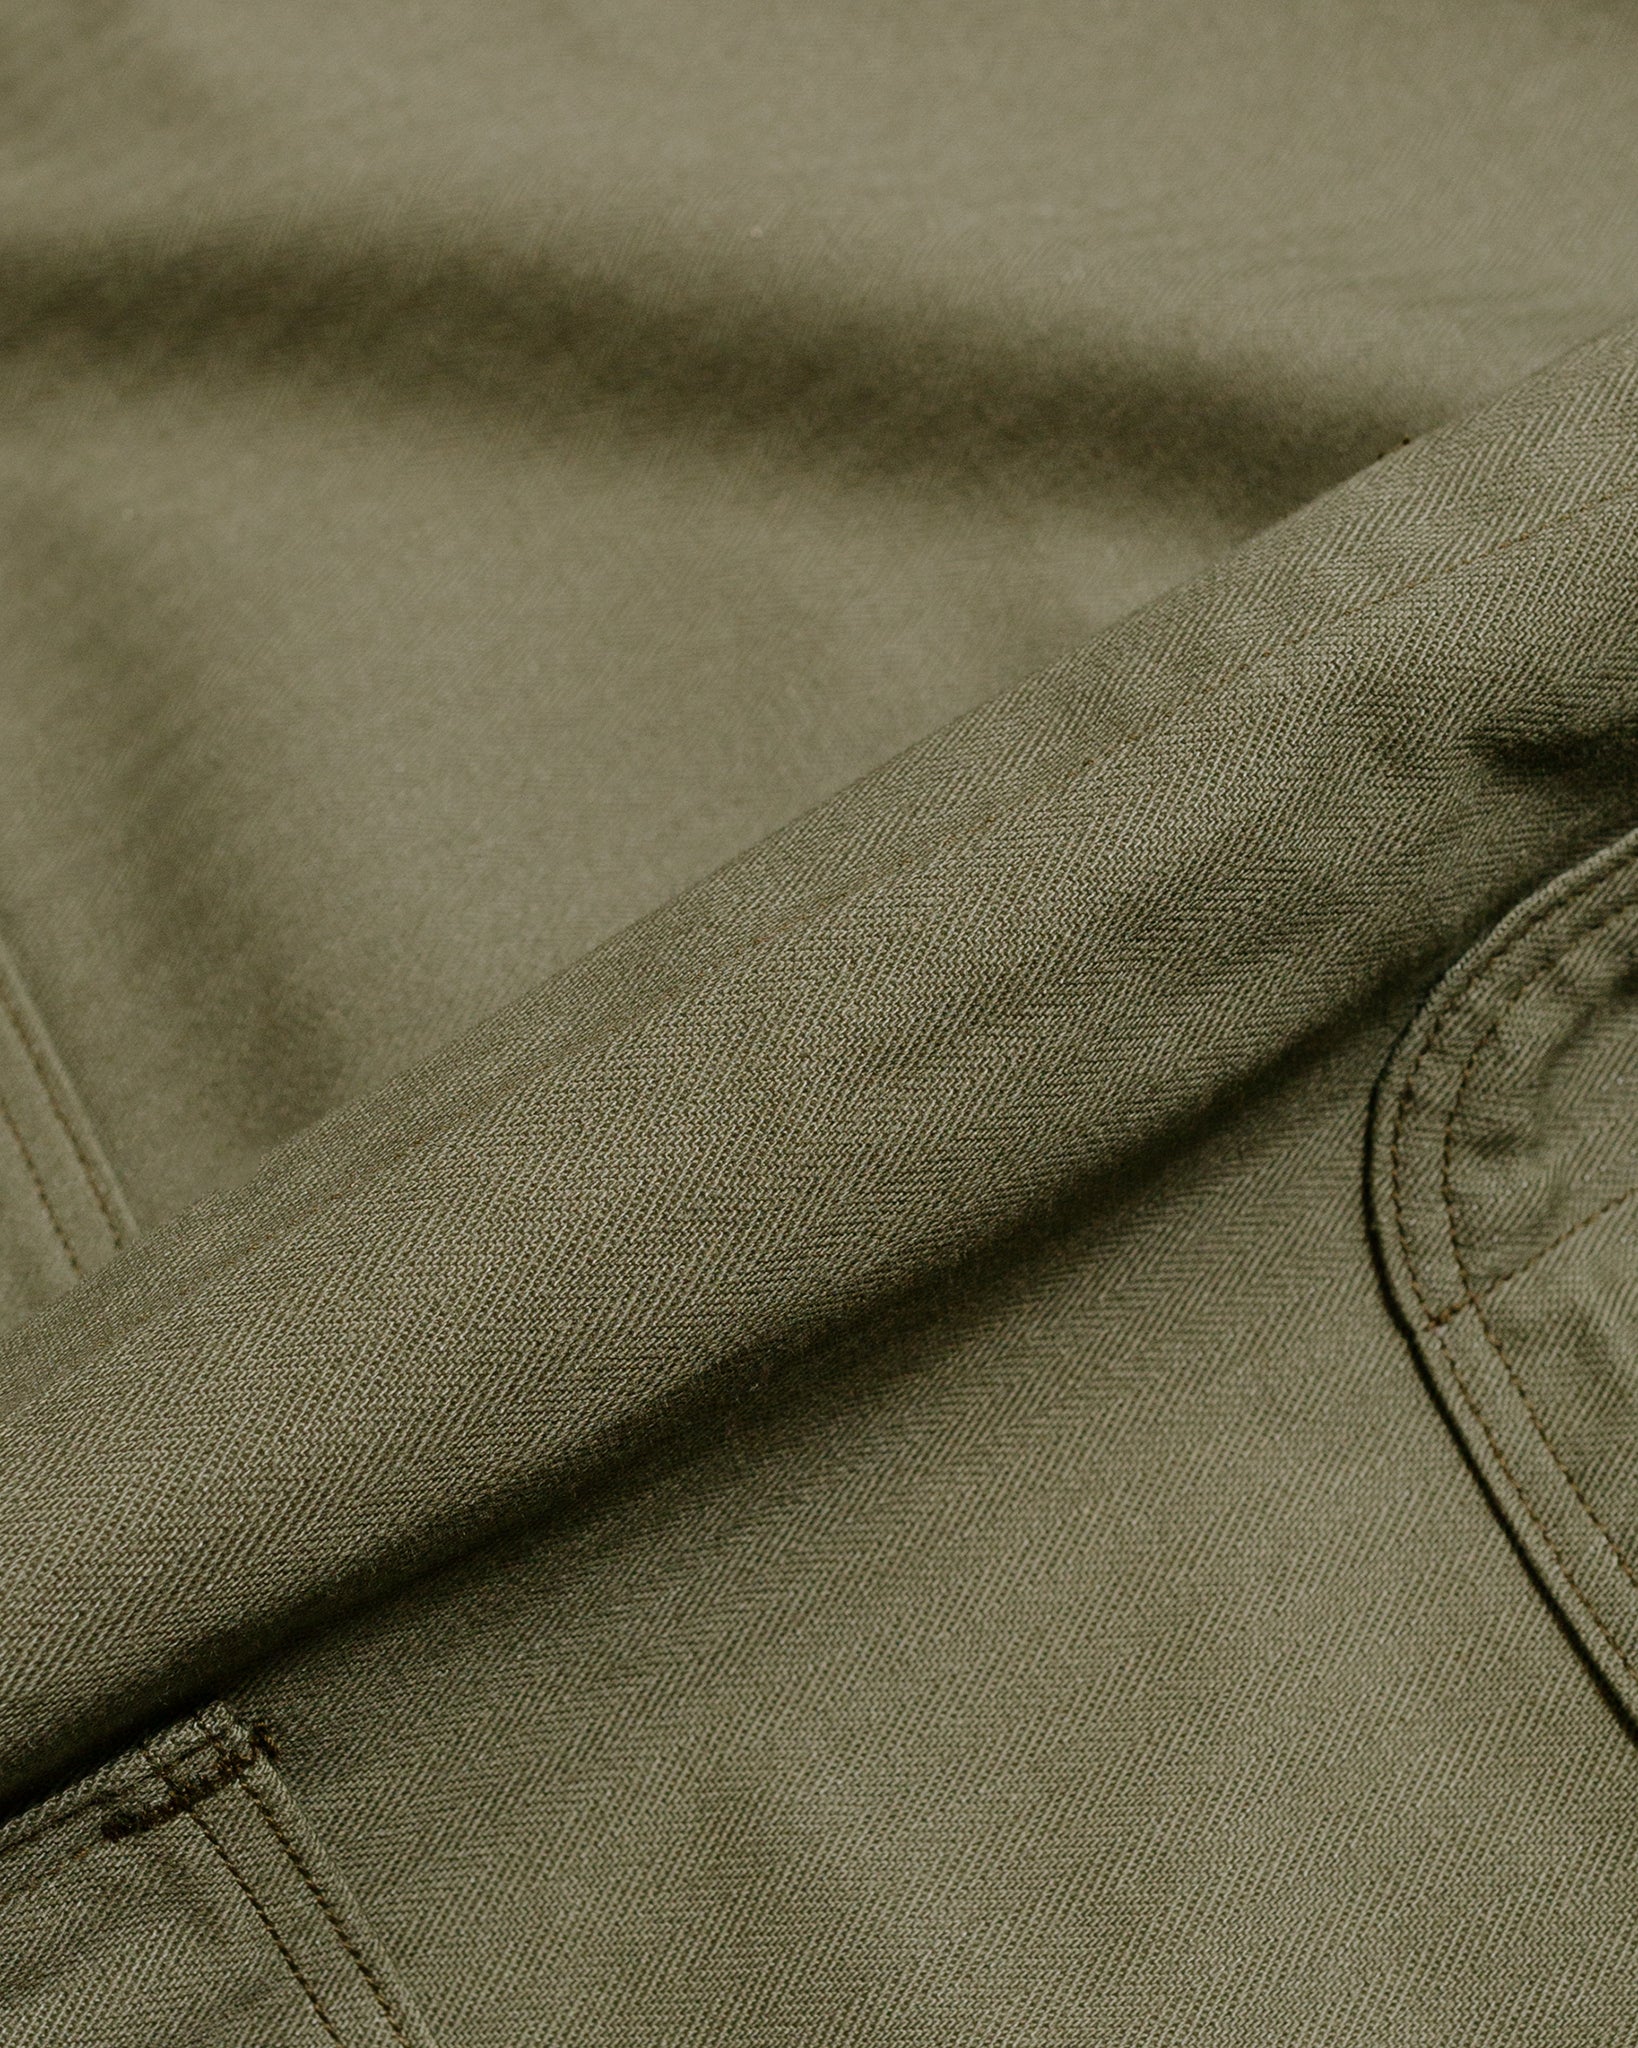 The Real McCoy's MJ22012 Jacket, Utility N-3 (Model 220) Olive fabric